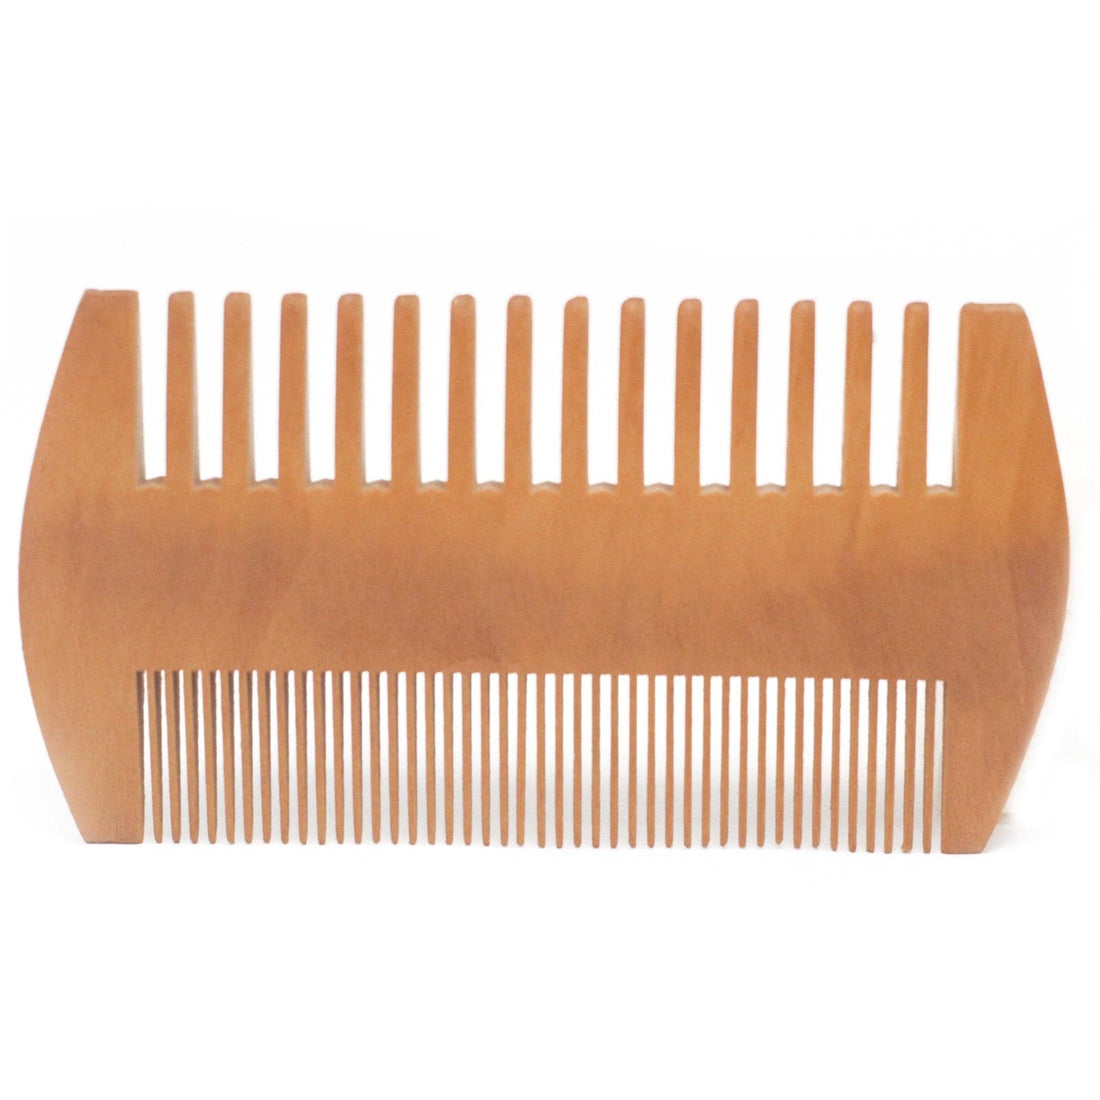 Two Sided Beard Comb - best price from Maltashopper.com BNC-01DS